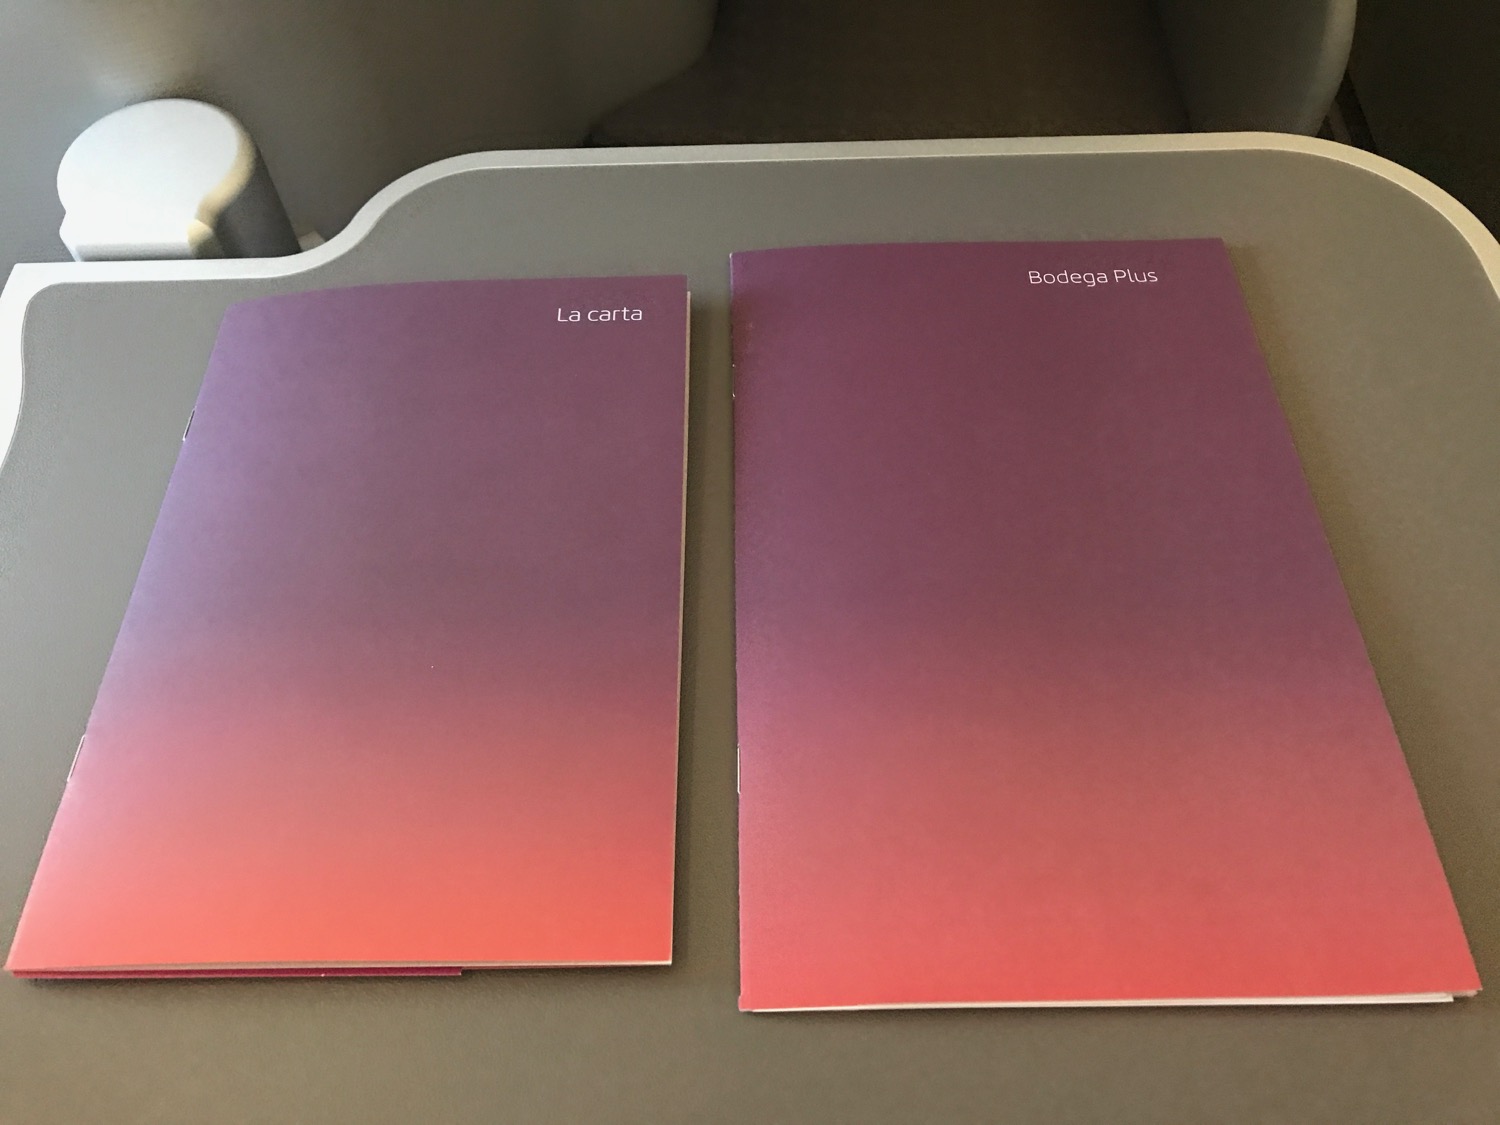 a pair of purple and pink folders on a table